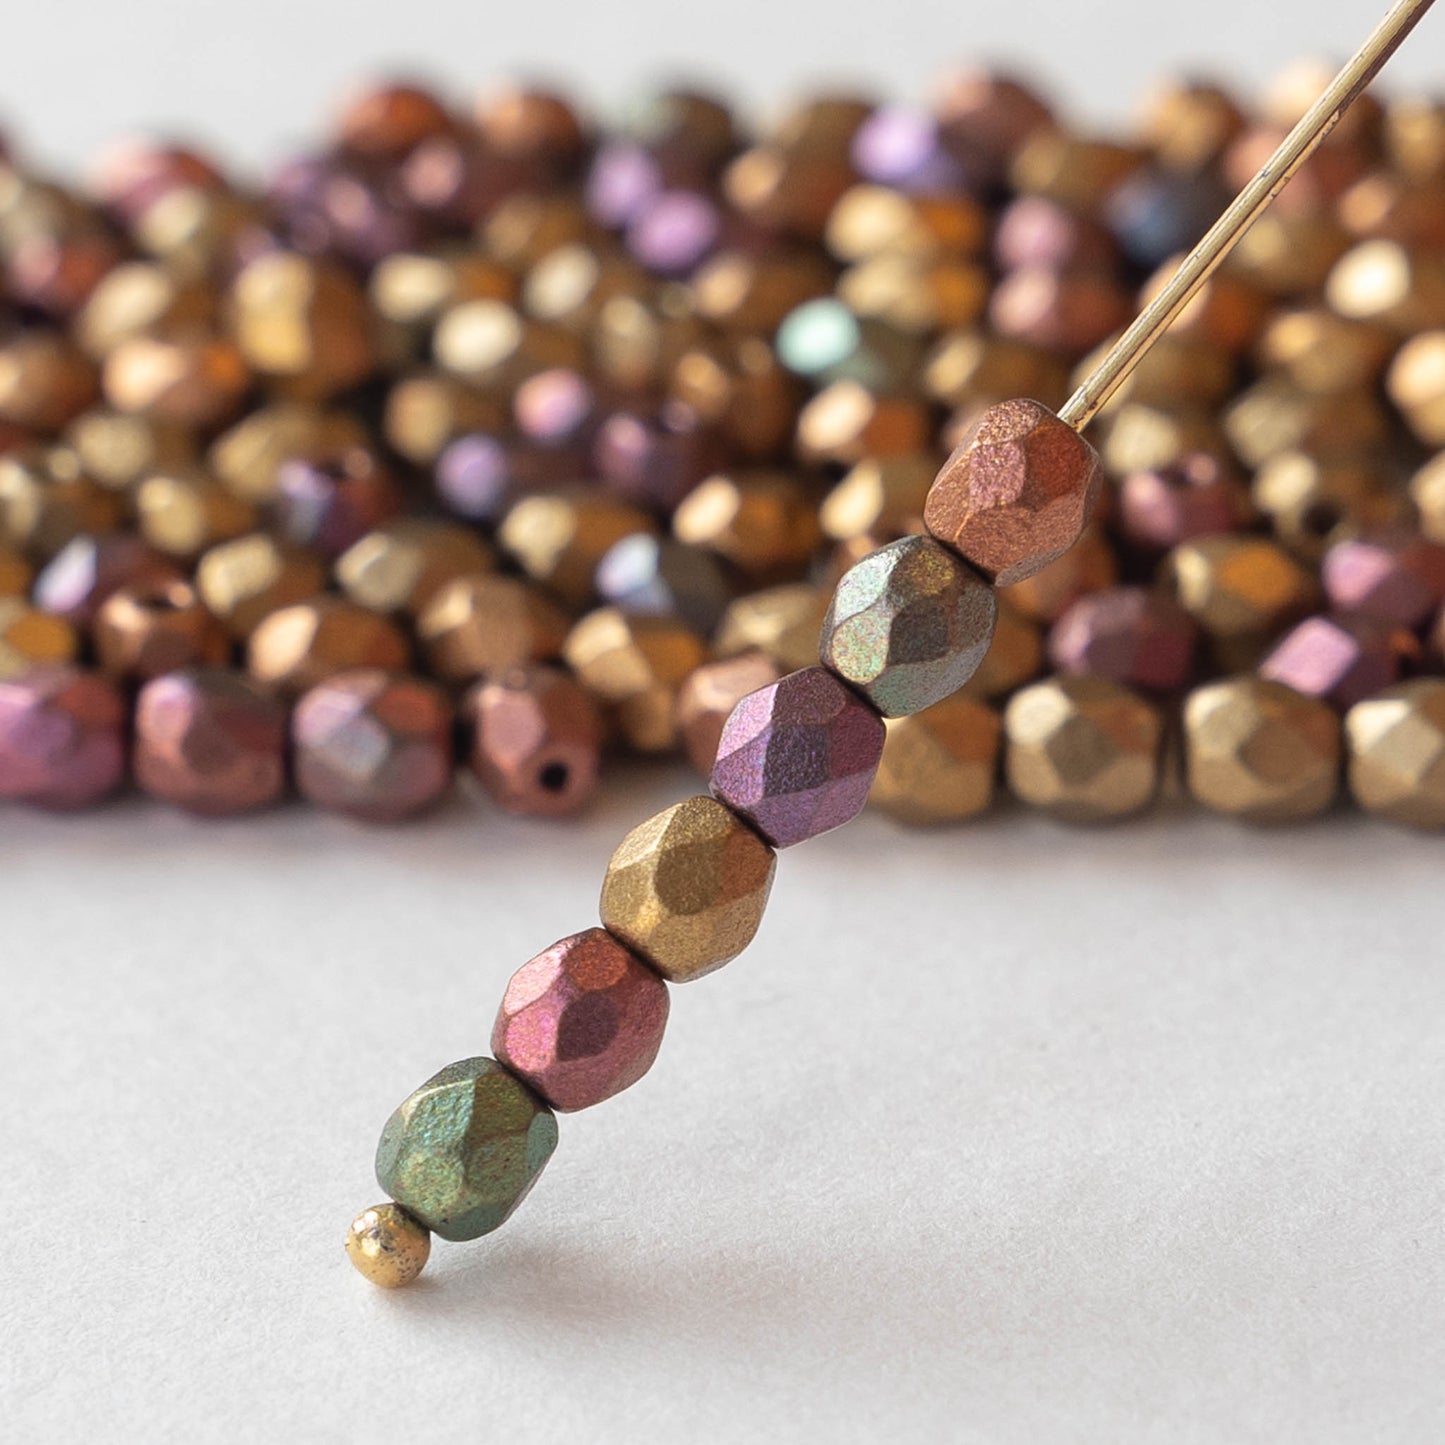 4mm Faceted Round Beads - Gold Iris Matte - 120 beads